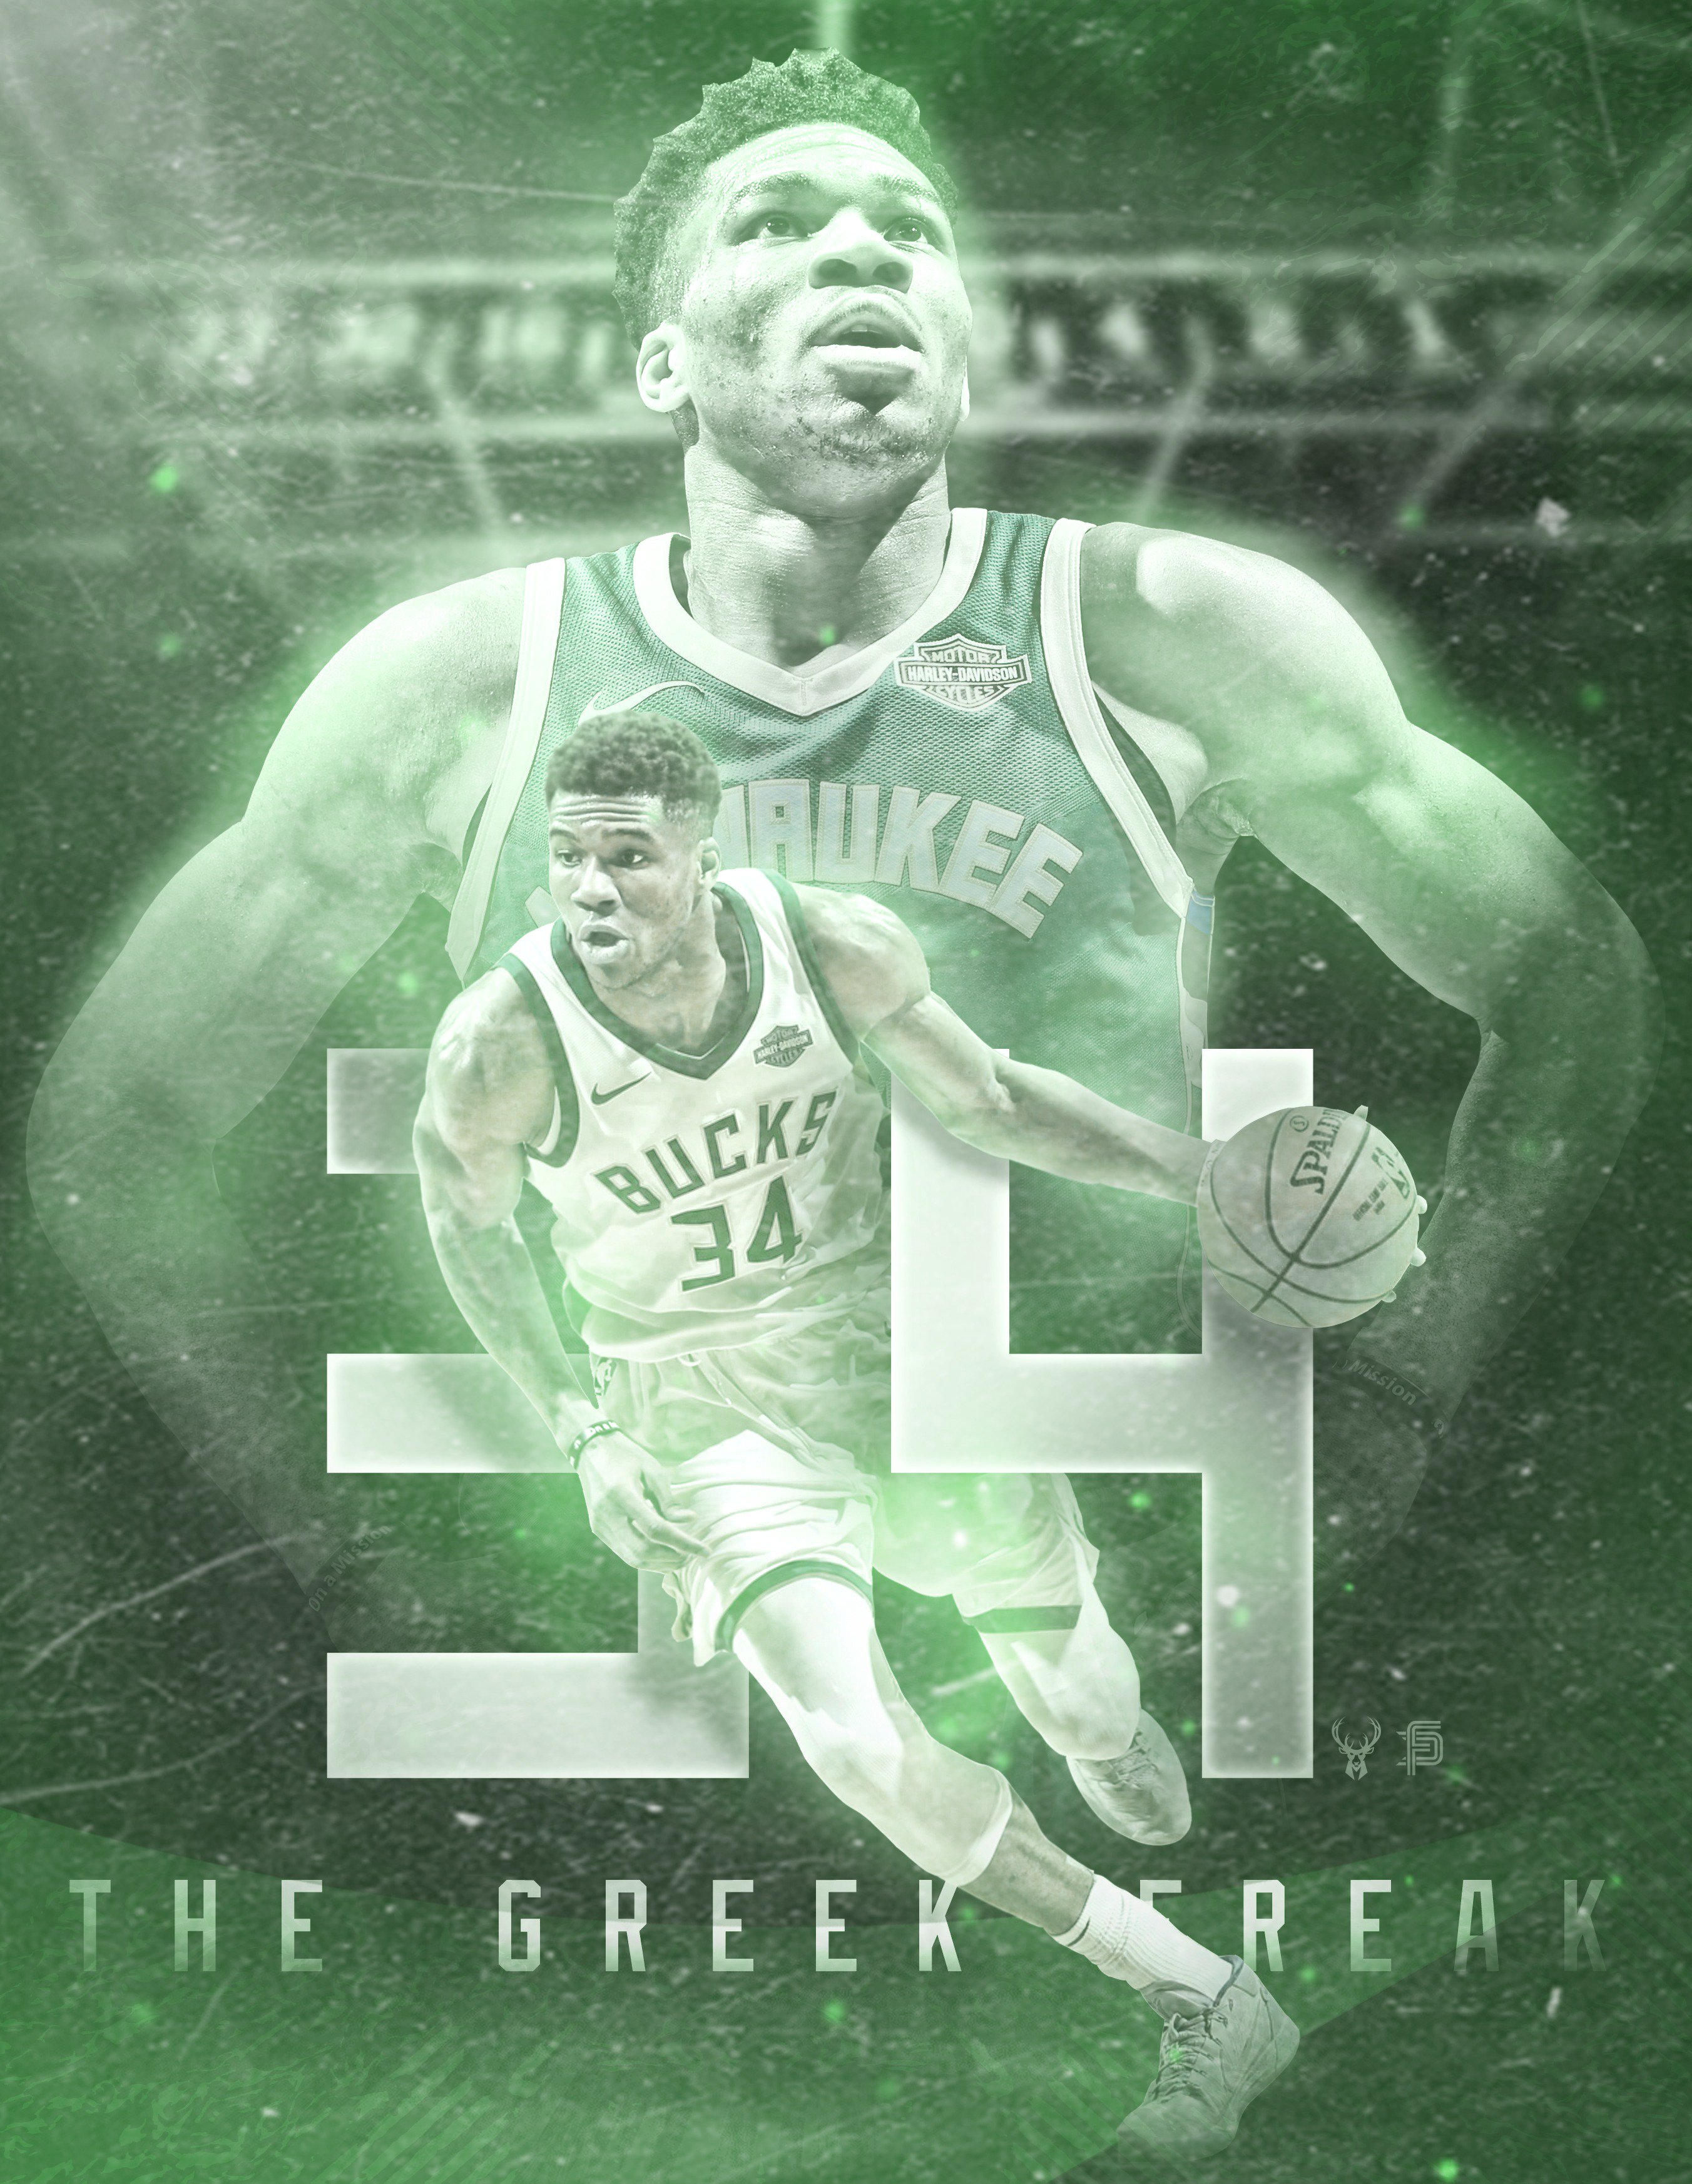 Ferry Twitterissä: Giannis Antetokounmpo graphic and phone wallpaper for #WallpaperWednesday. #FearTheDeer